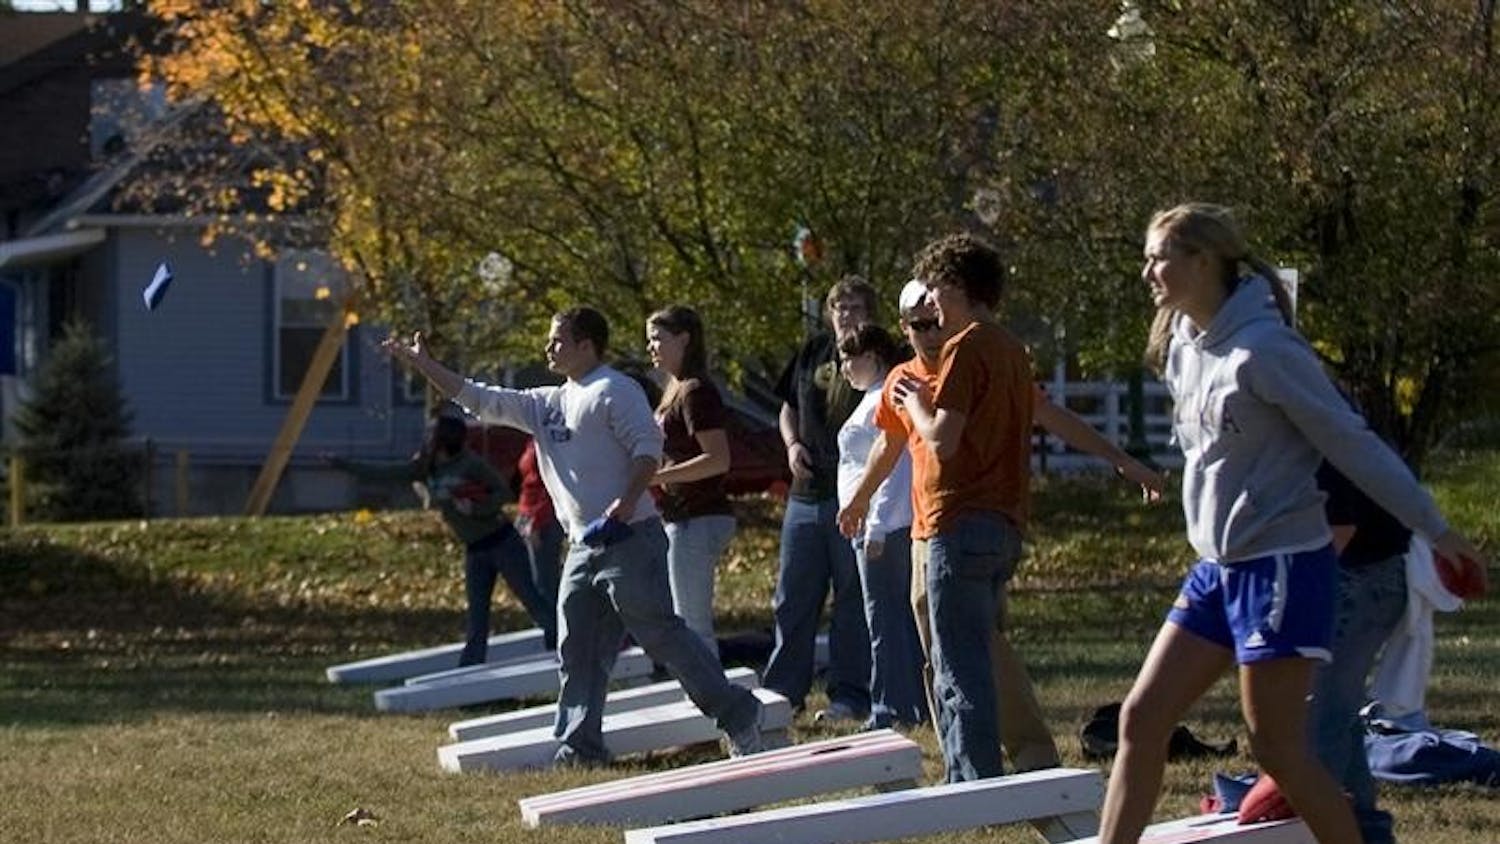 Players compete late Wednesday afternoon in a cornhole tournament at Dunn Meadow.  The event, hosted by the Student Alumni Association, will donnate all proceeds to the United Way.